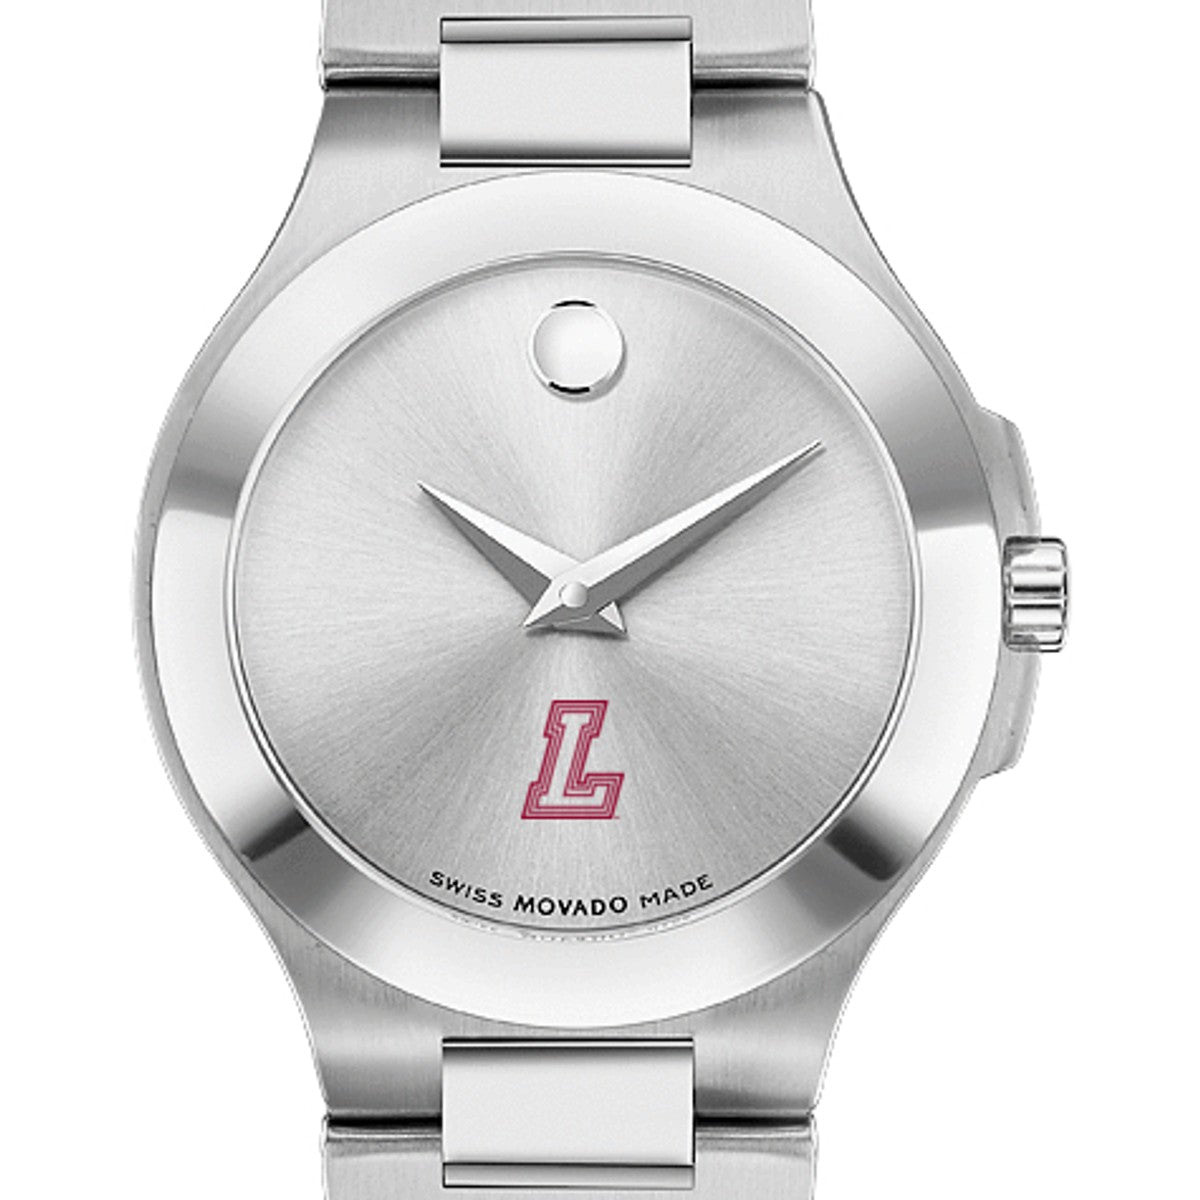 Lafayette College Women's Watches. TAG Heuer, MOVADO | M.LaHart & Co.